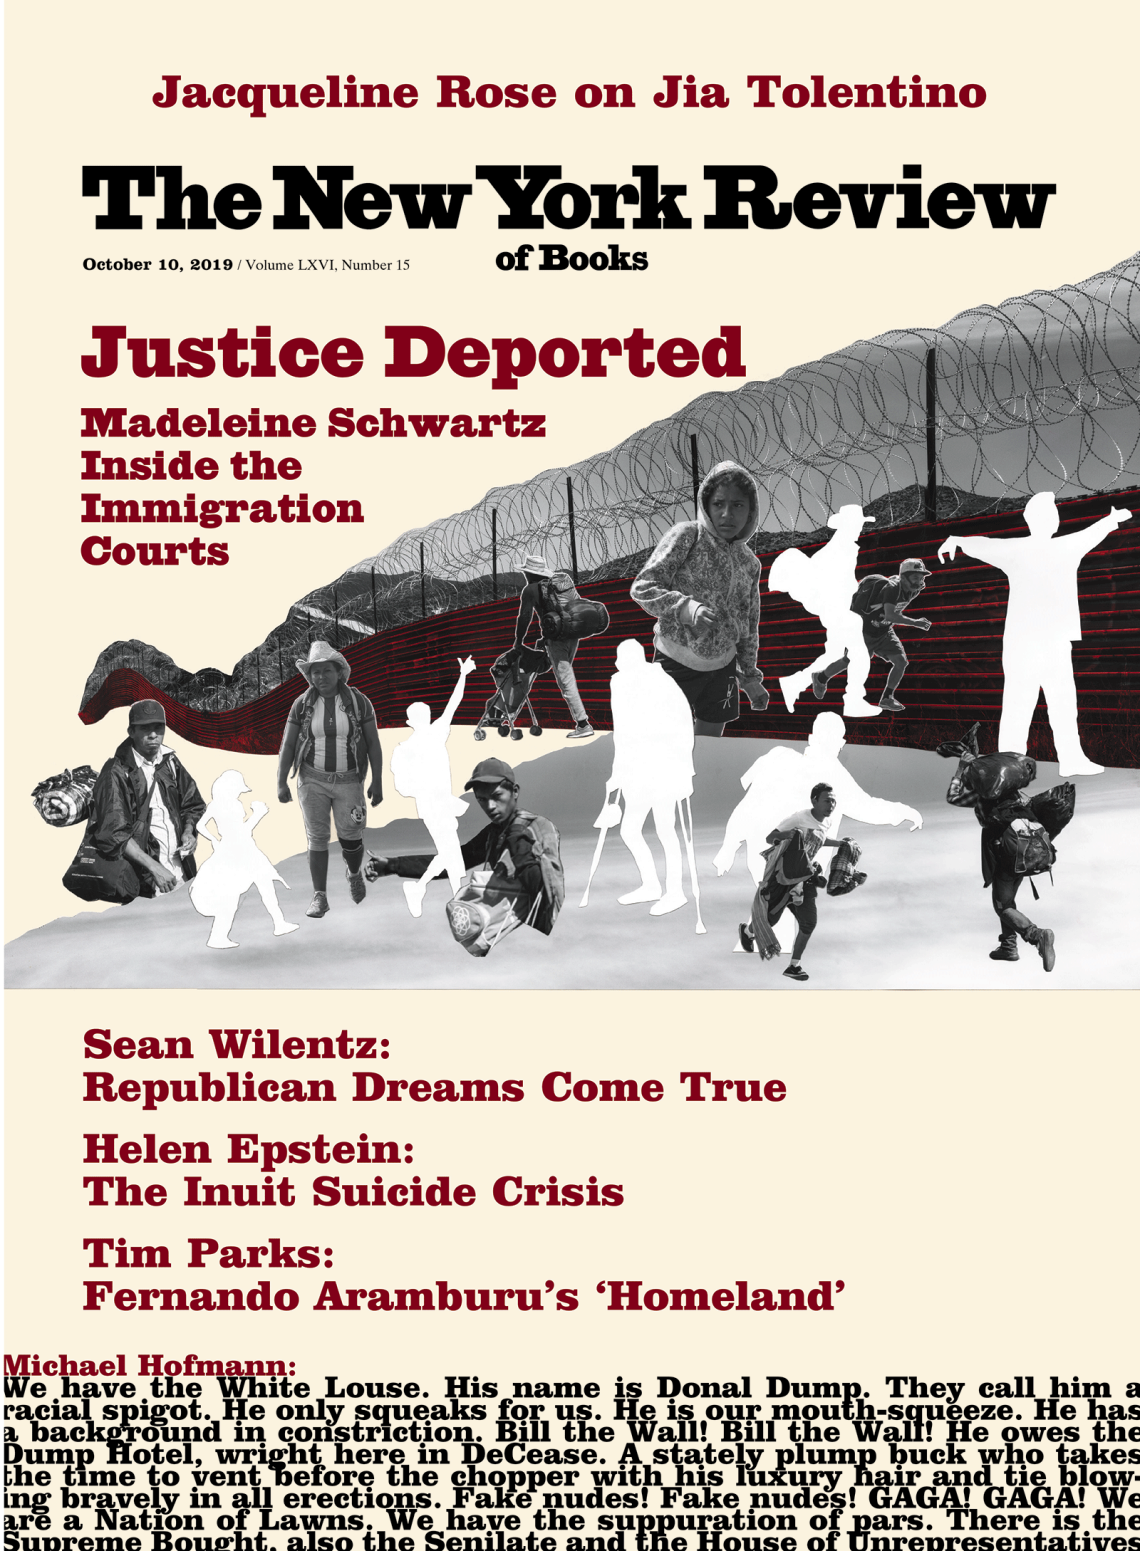 Image of the October 10, 2019 issue cover.